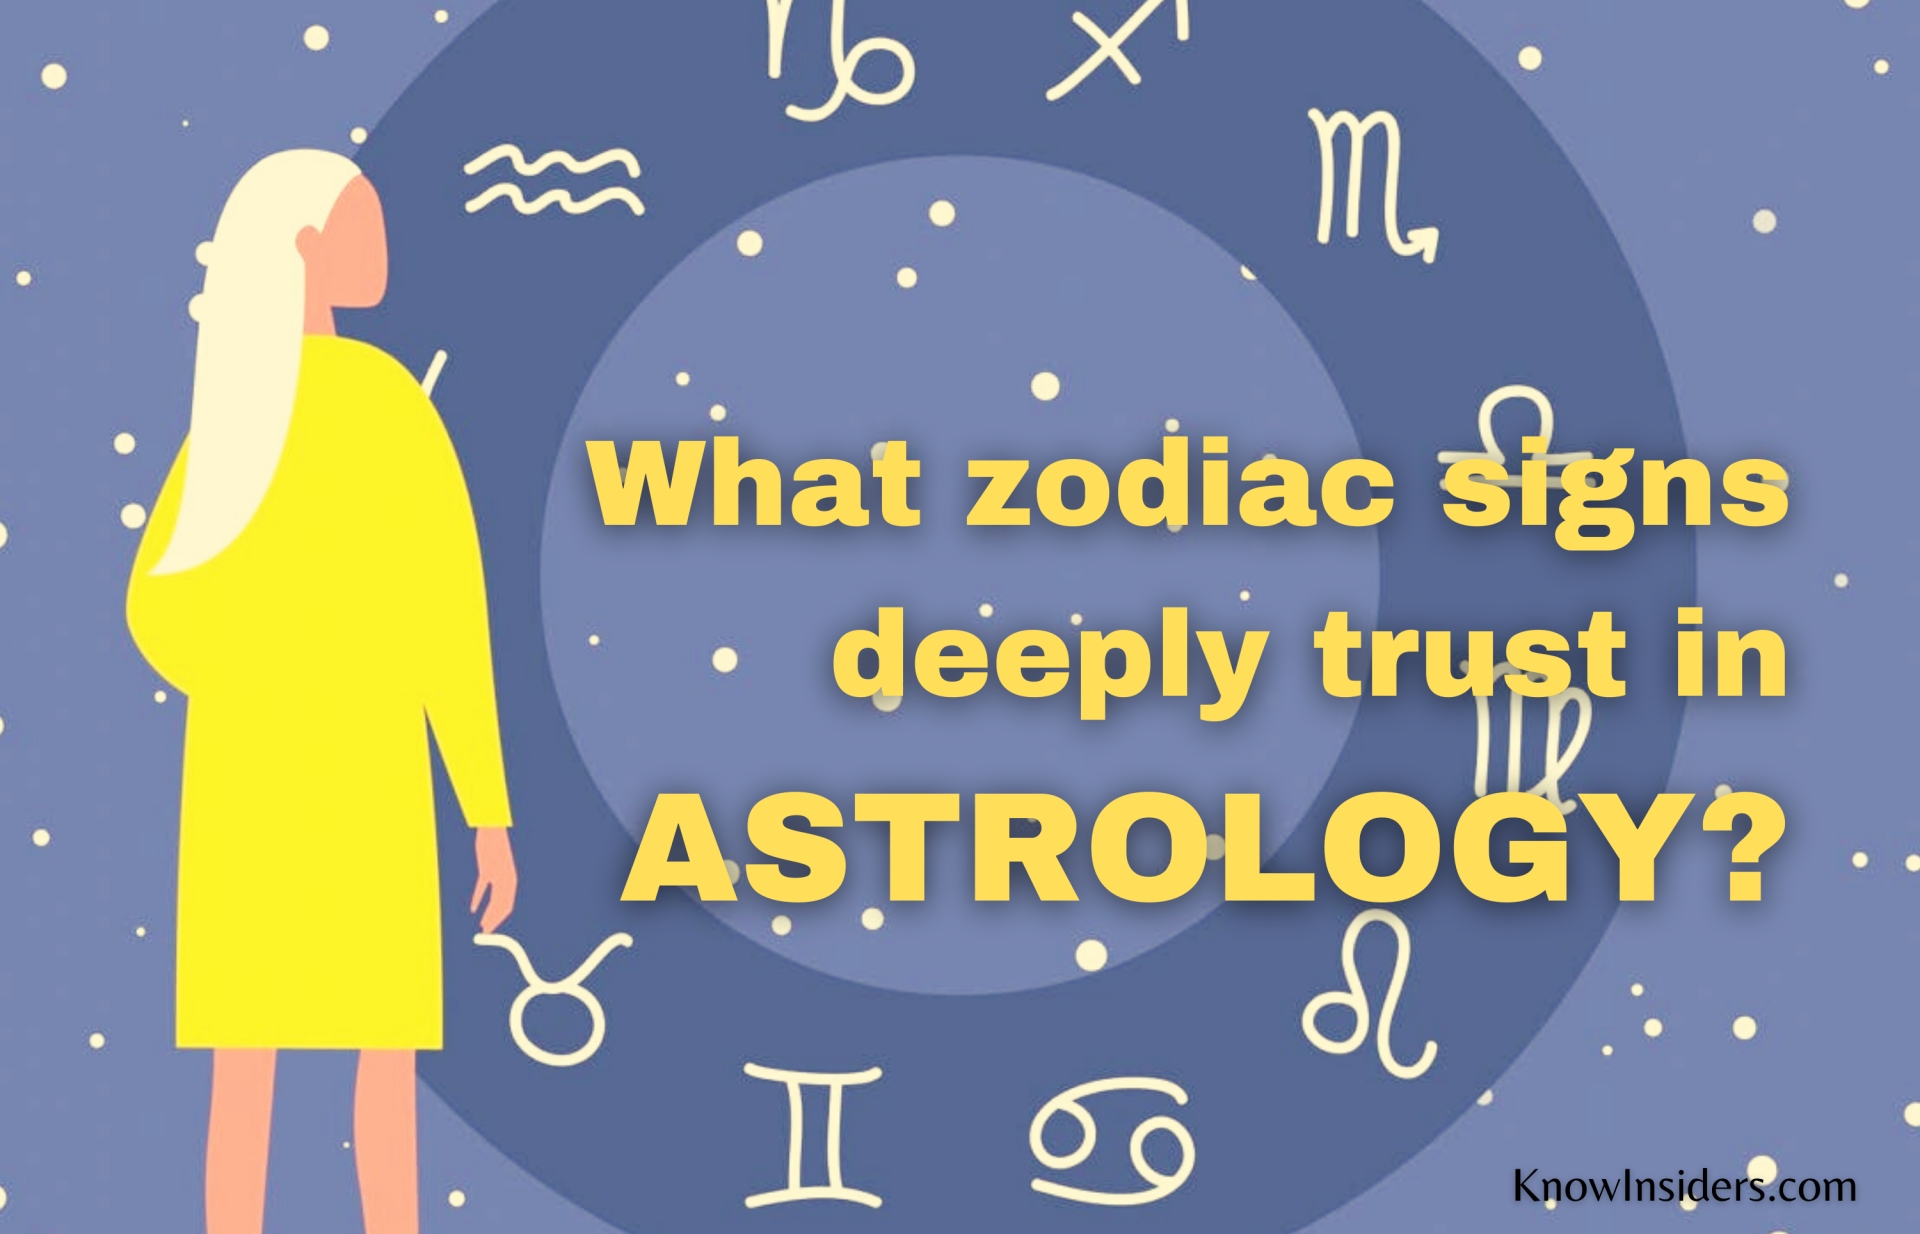 What Zodiac Signs Deeply Trust in Astrology?